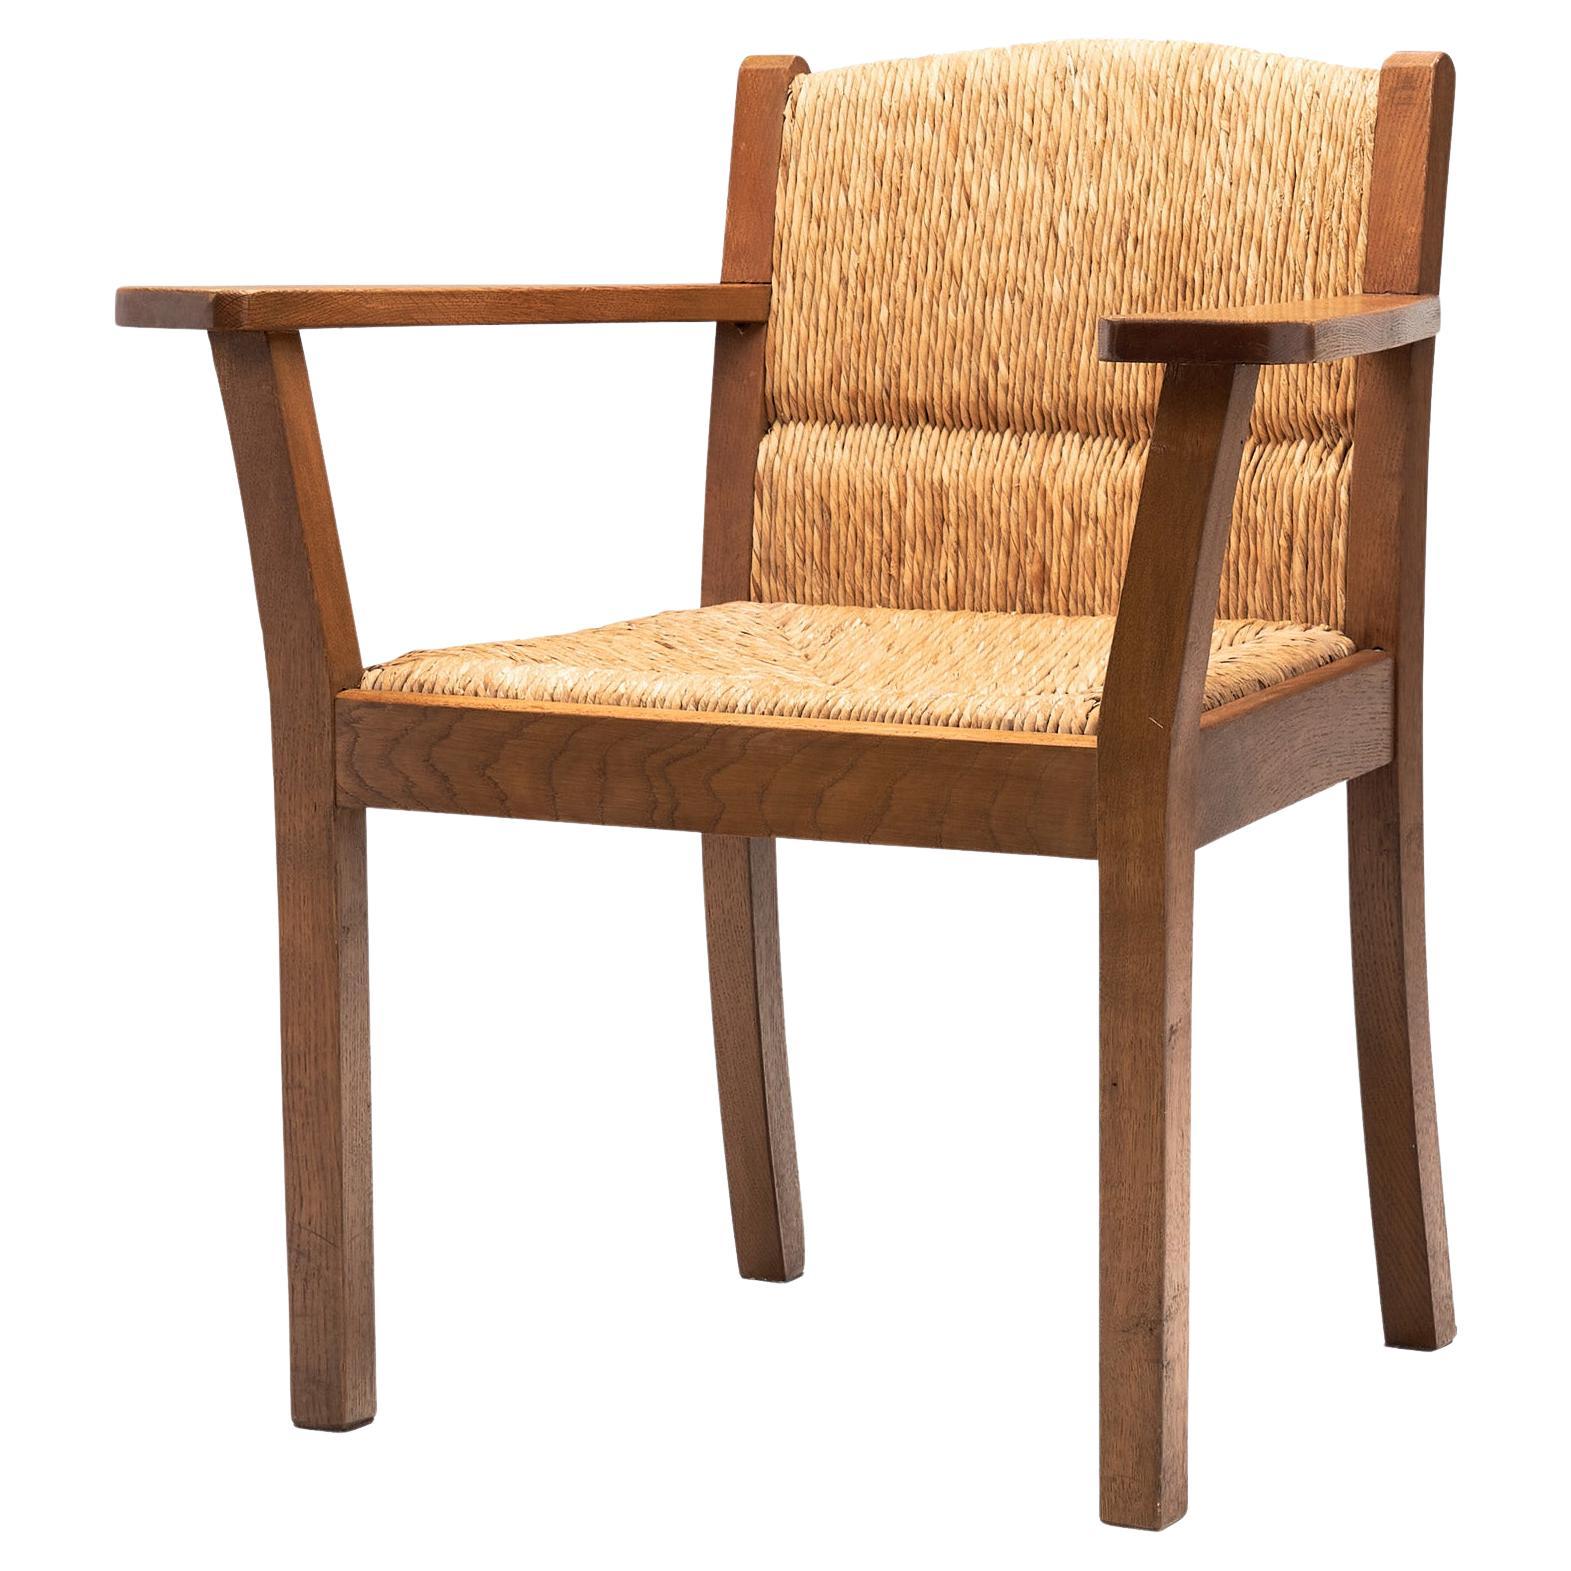 Oak Worpsweder Armchair by Willi Ohler for Erich Schultz, Germany 1920s For Sale